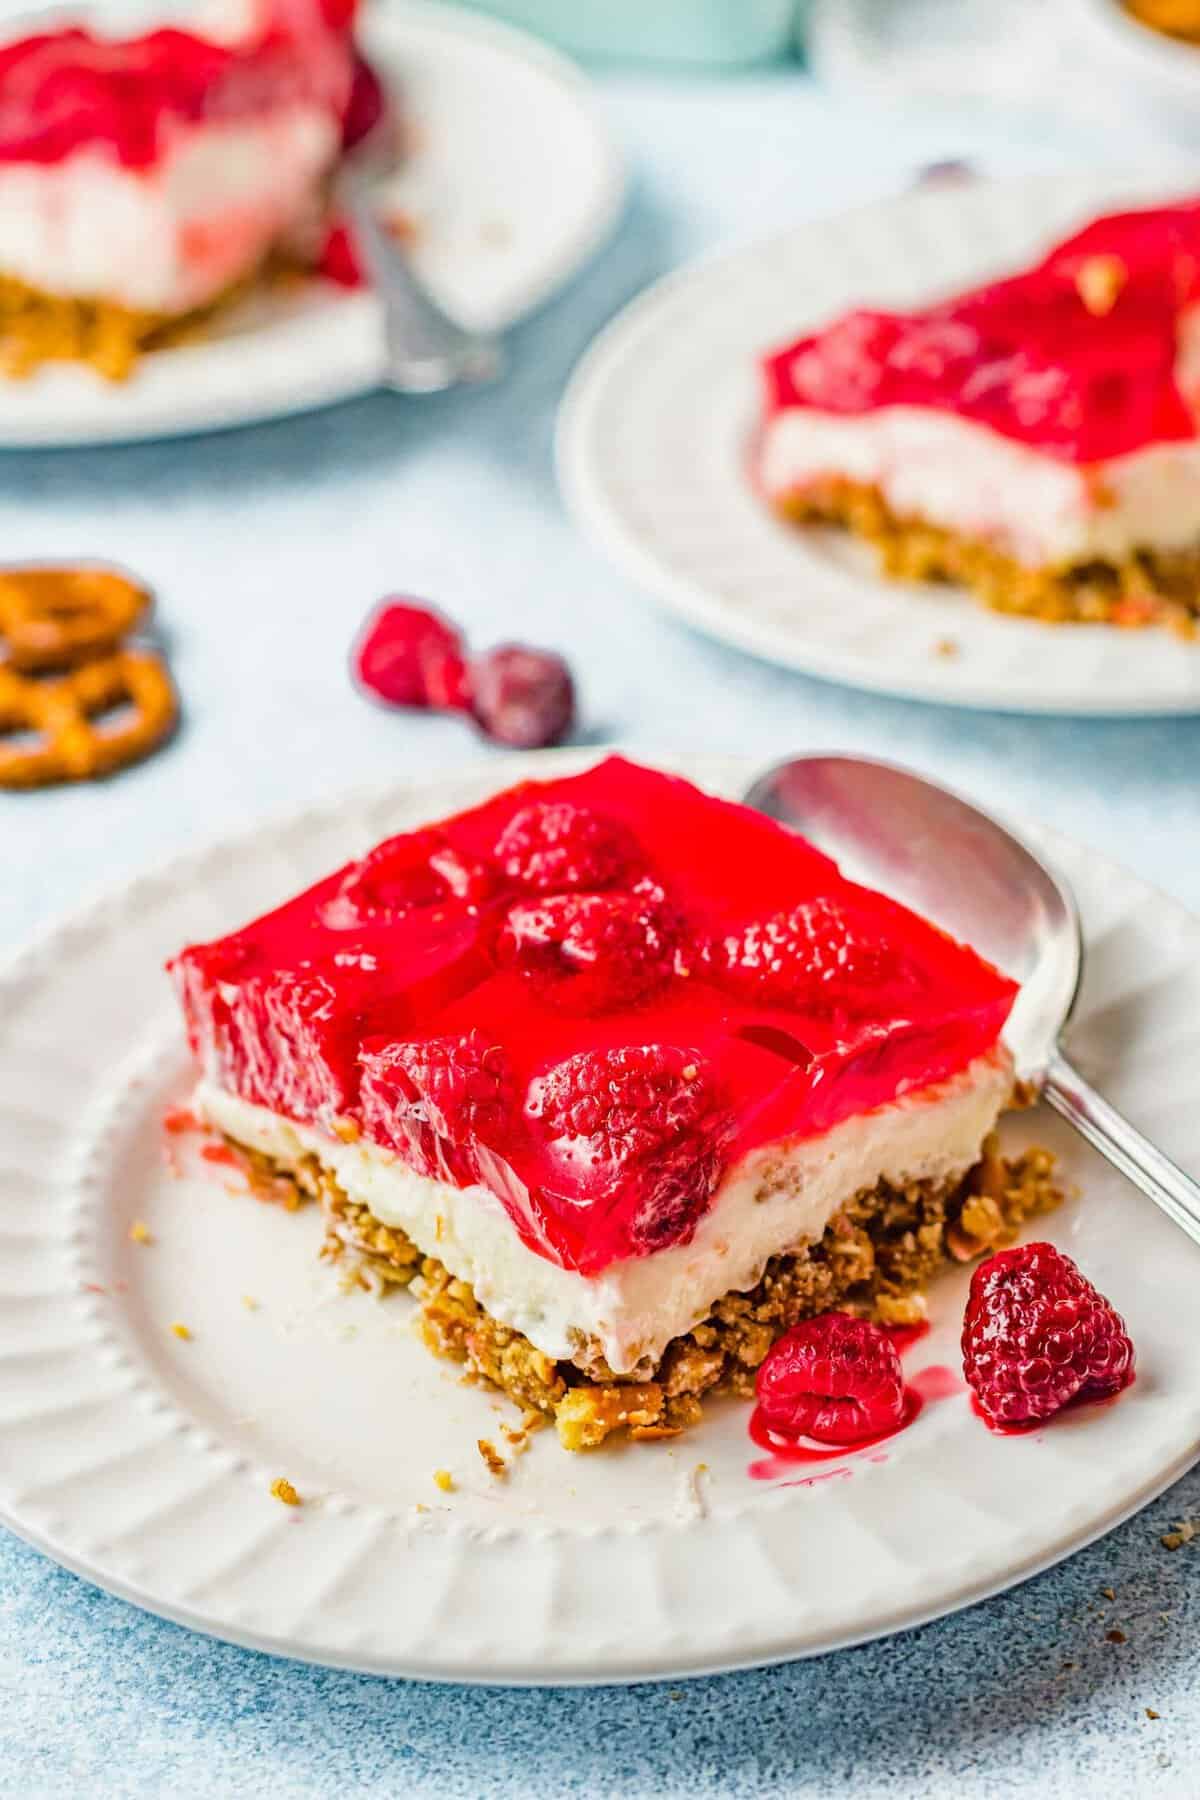 Square of raspberry pretzel salad on plate with spoon